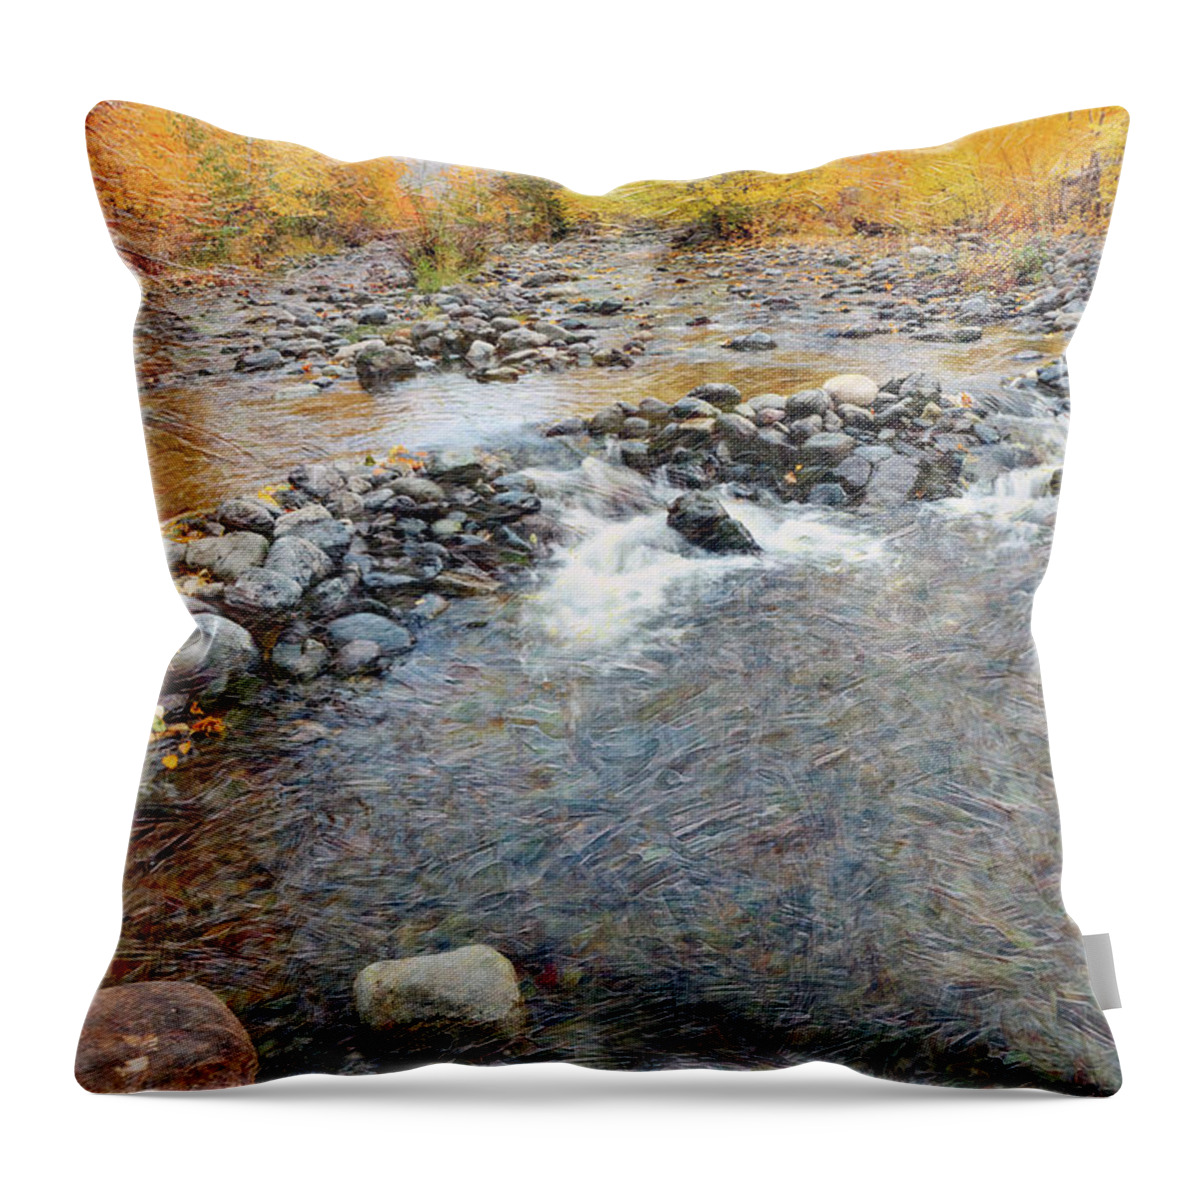 River Throw Pillow featuring the photograph Tranquille Creek # 2 by Ed Hall